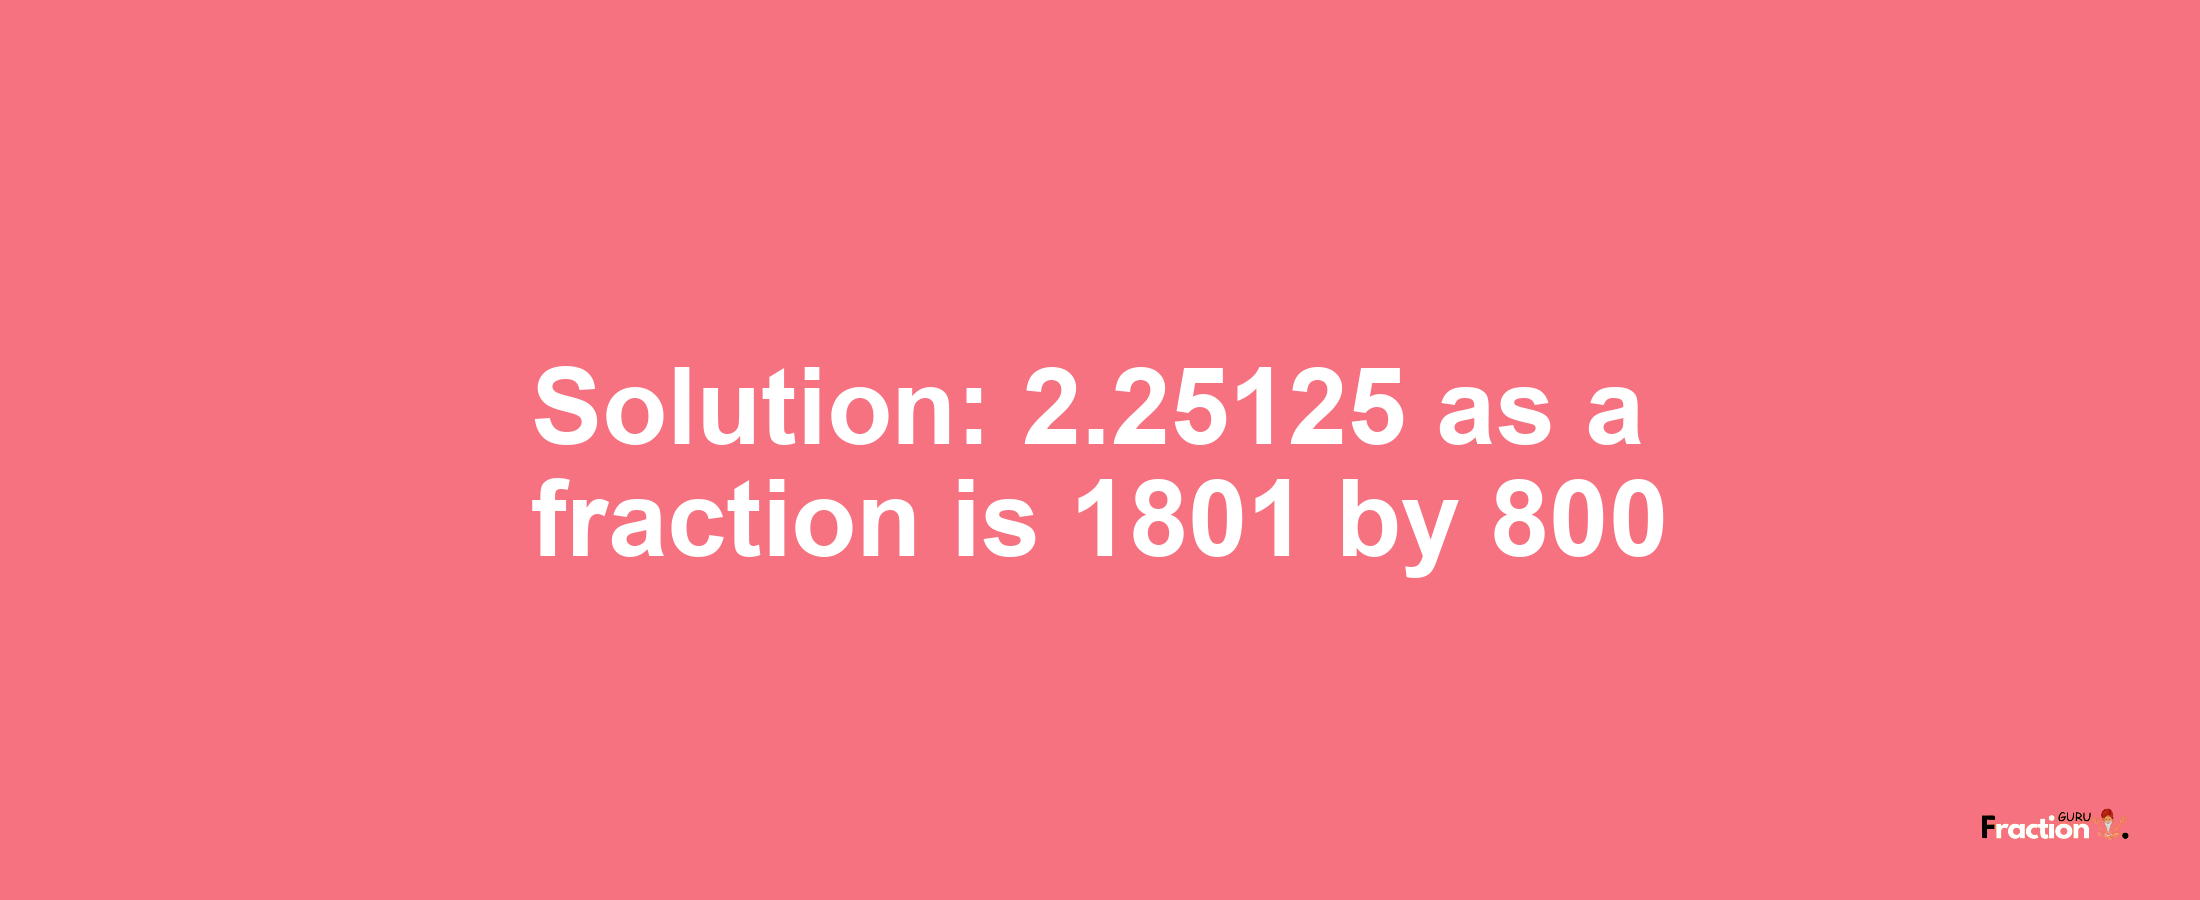 Solution:2.25125 as a fraction is 1801/800